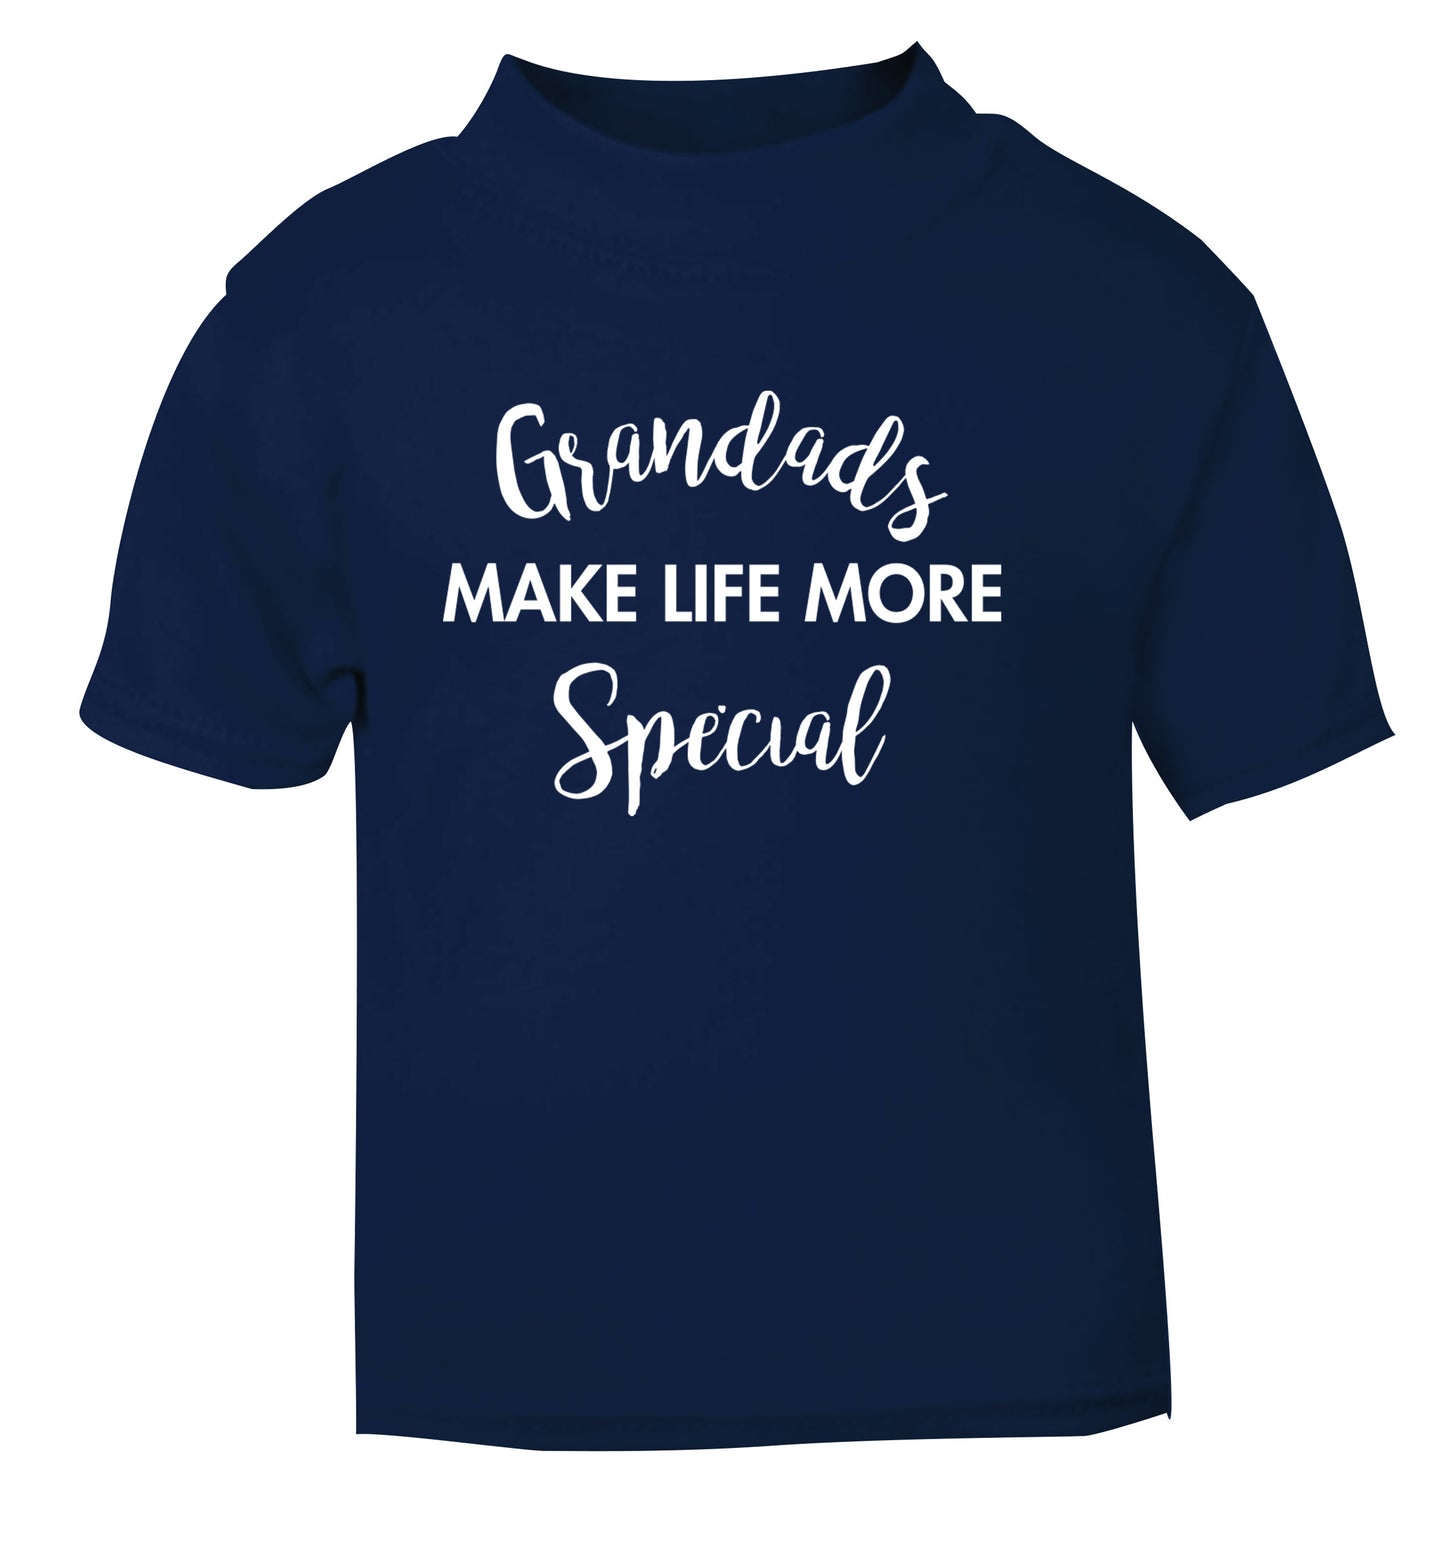 Grandads make life more special navy Baby Toddler Tshirt 2 Years